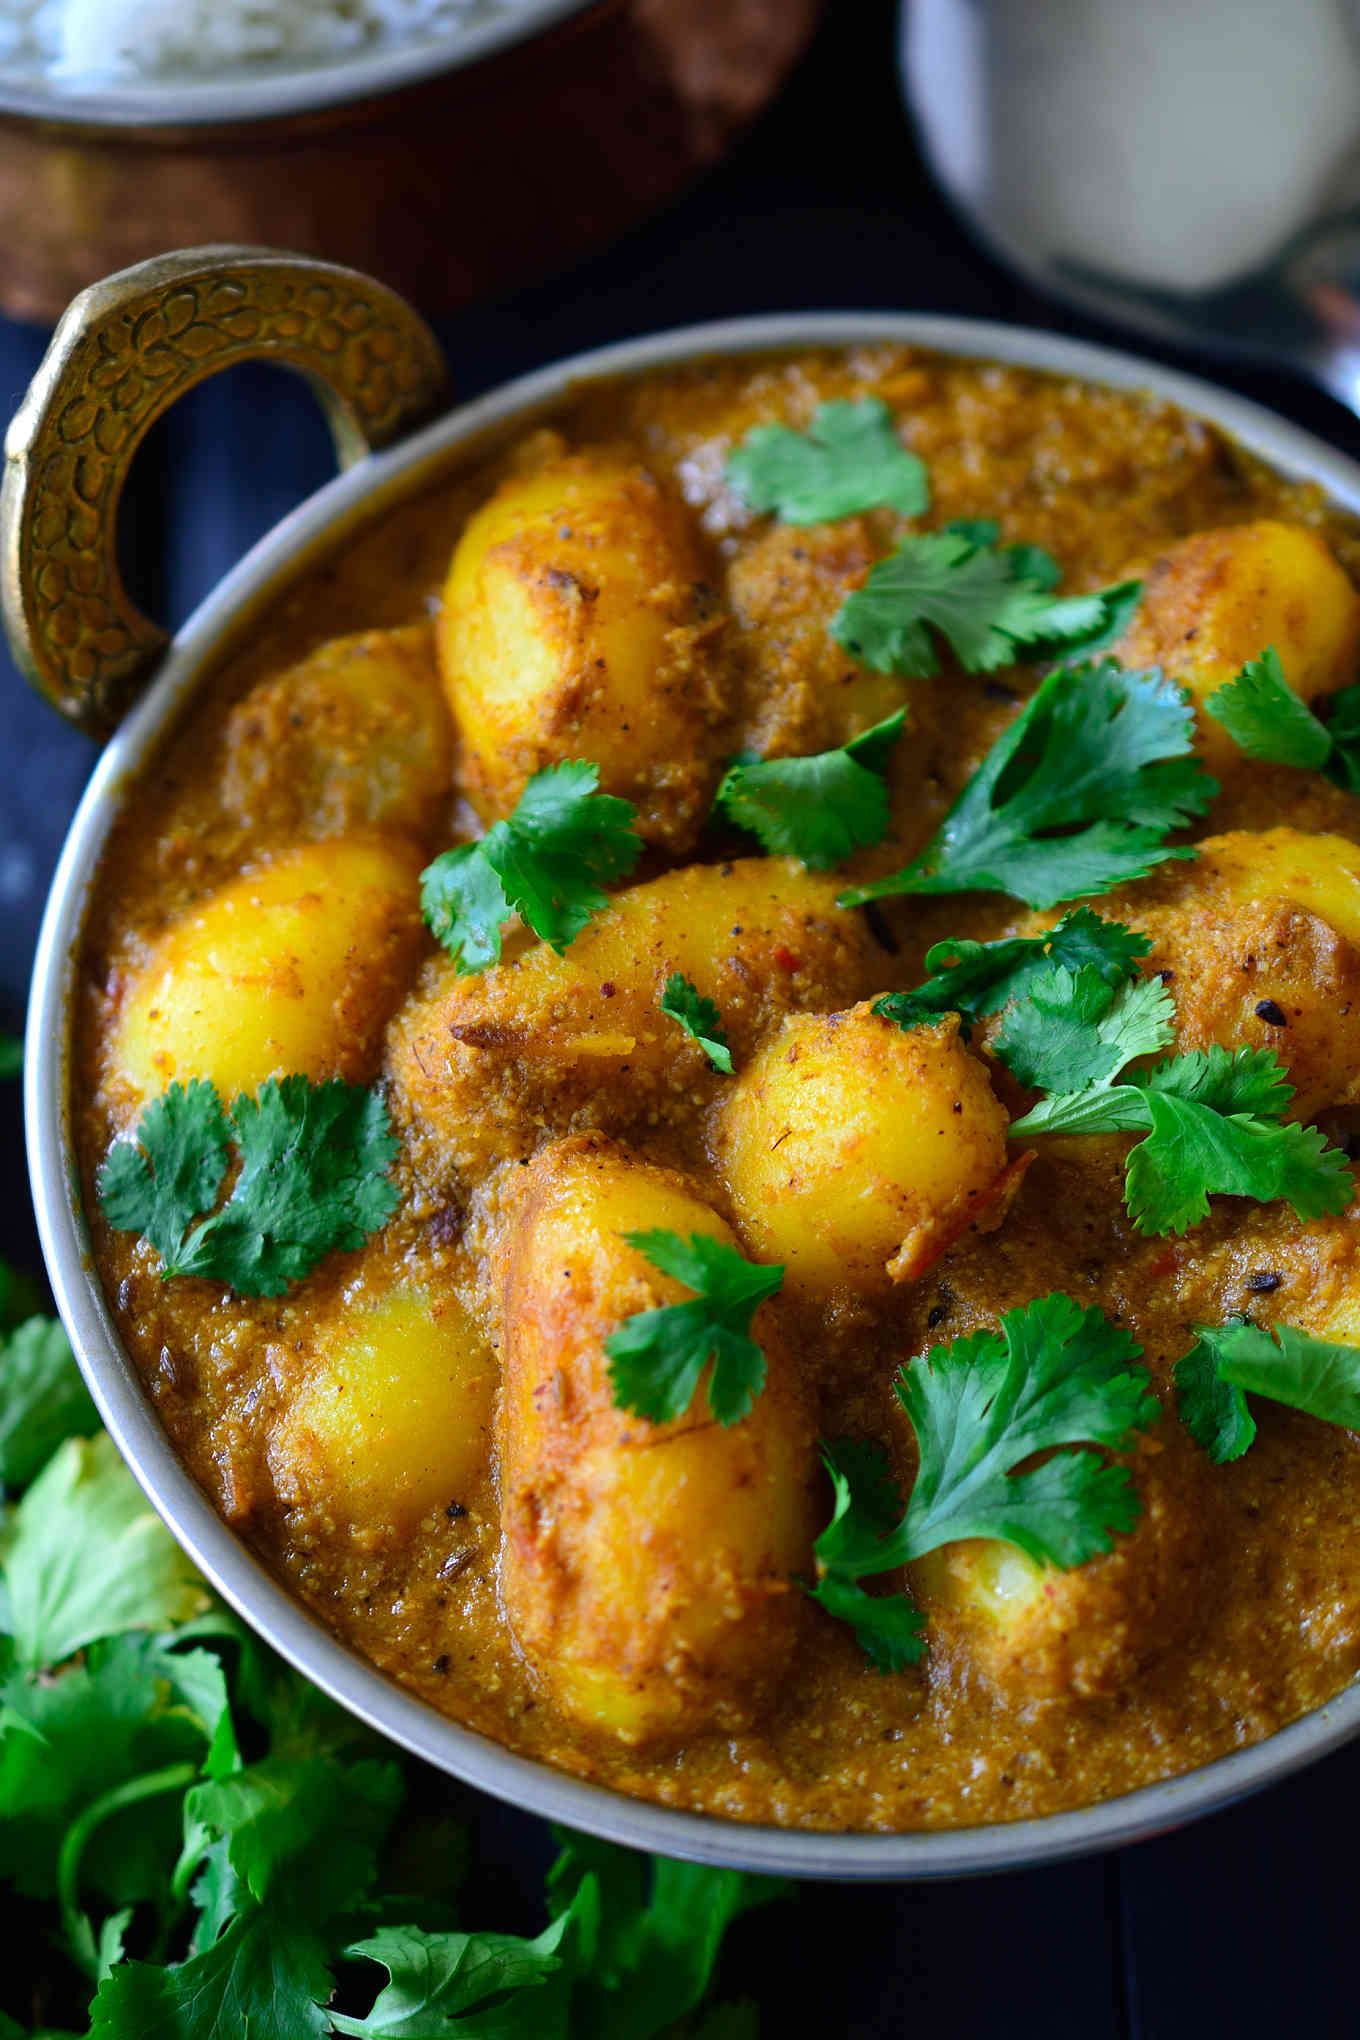 This spicy vegan potato curry is full on with flavour and easy to make with pantry staples. Fried potatoes are simmered in a spicy and savory tomato-cashew sauce infused with delicious, aromatic Indian spices. You''l be surprised by how tasty the humble potato can be! 